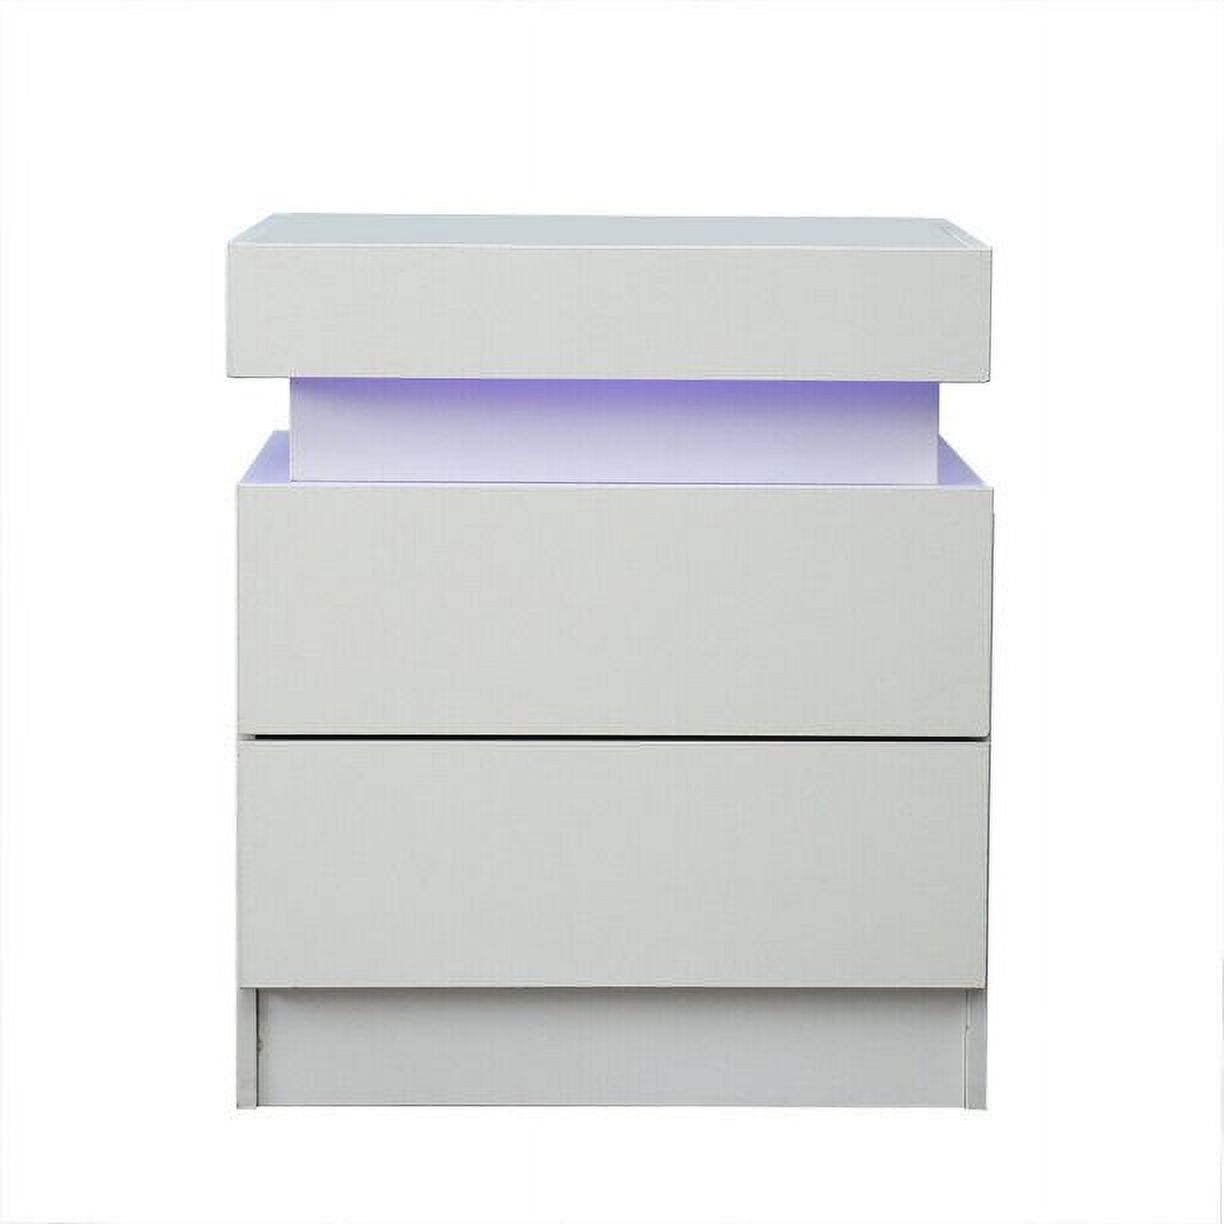 LED Nightstand Modern Nightstand with Led Lights Wood Led Bedside Table Nightstand with 2 High Gloss Drawers for Bedroom, Dorm, White - image 3 of 8